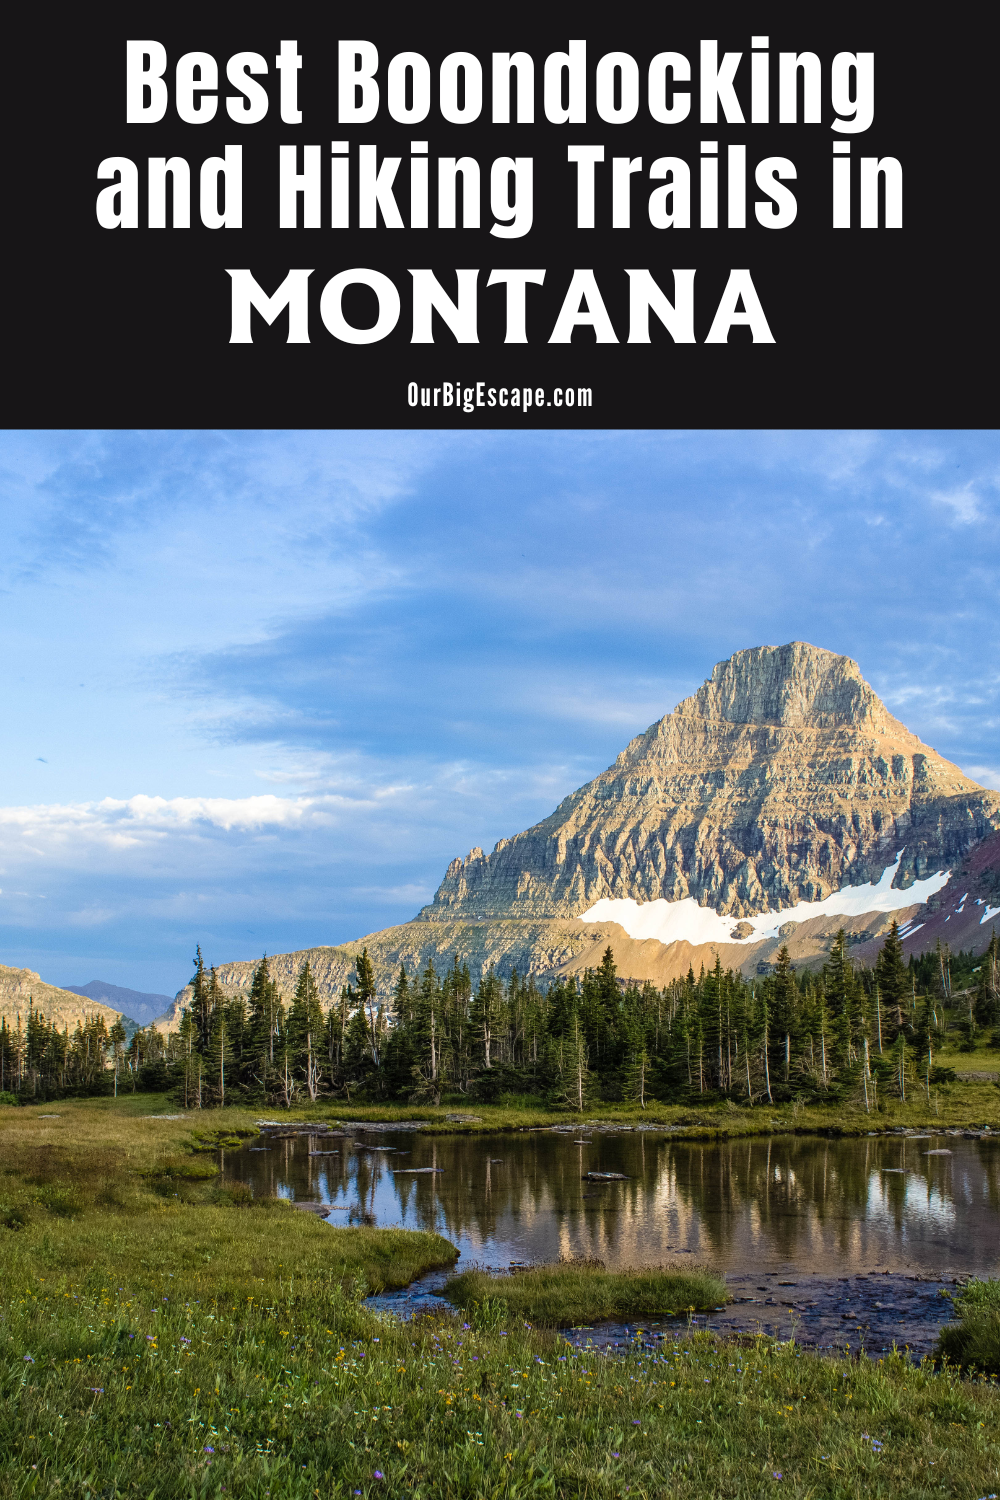 Best Boondocking and Hiking Trails in Montana